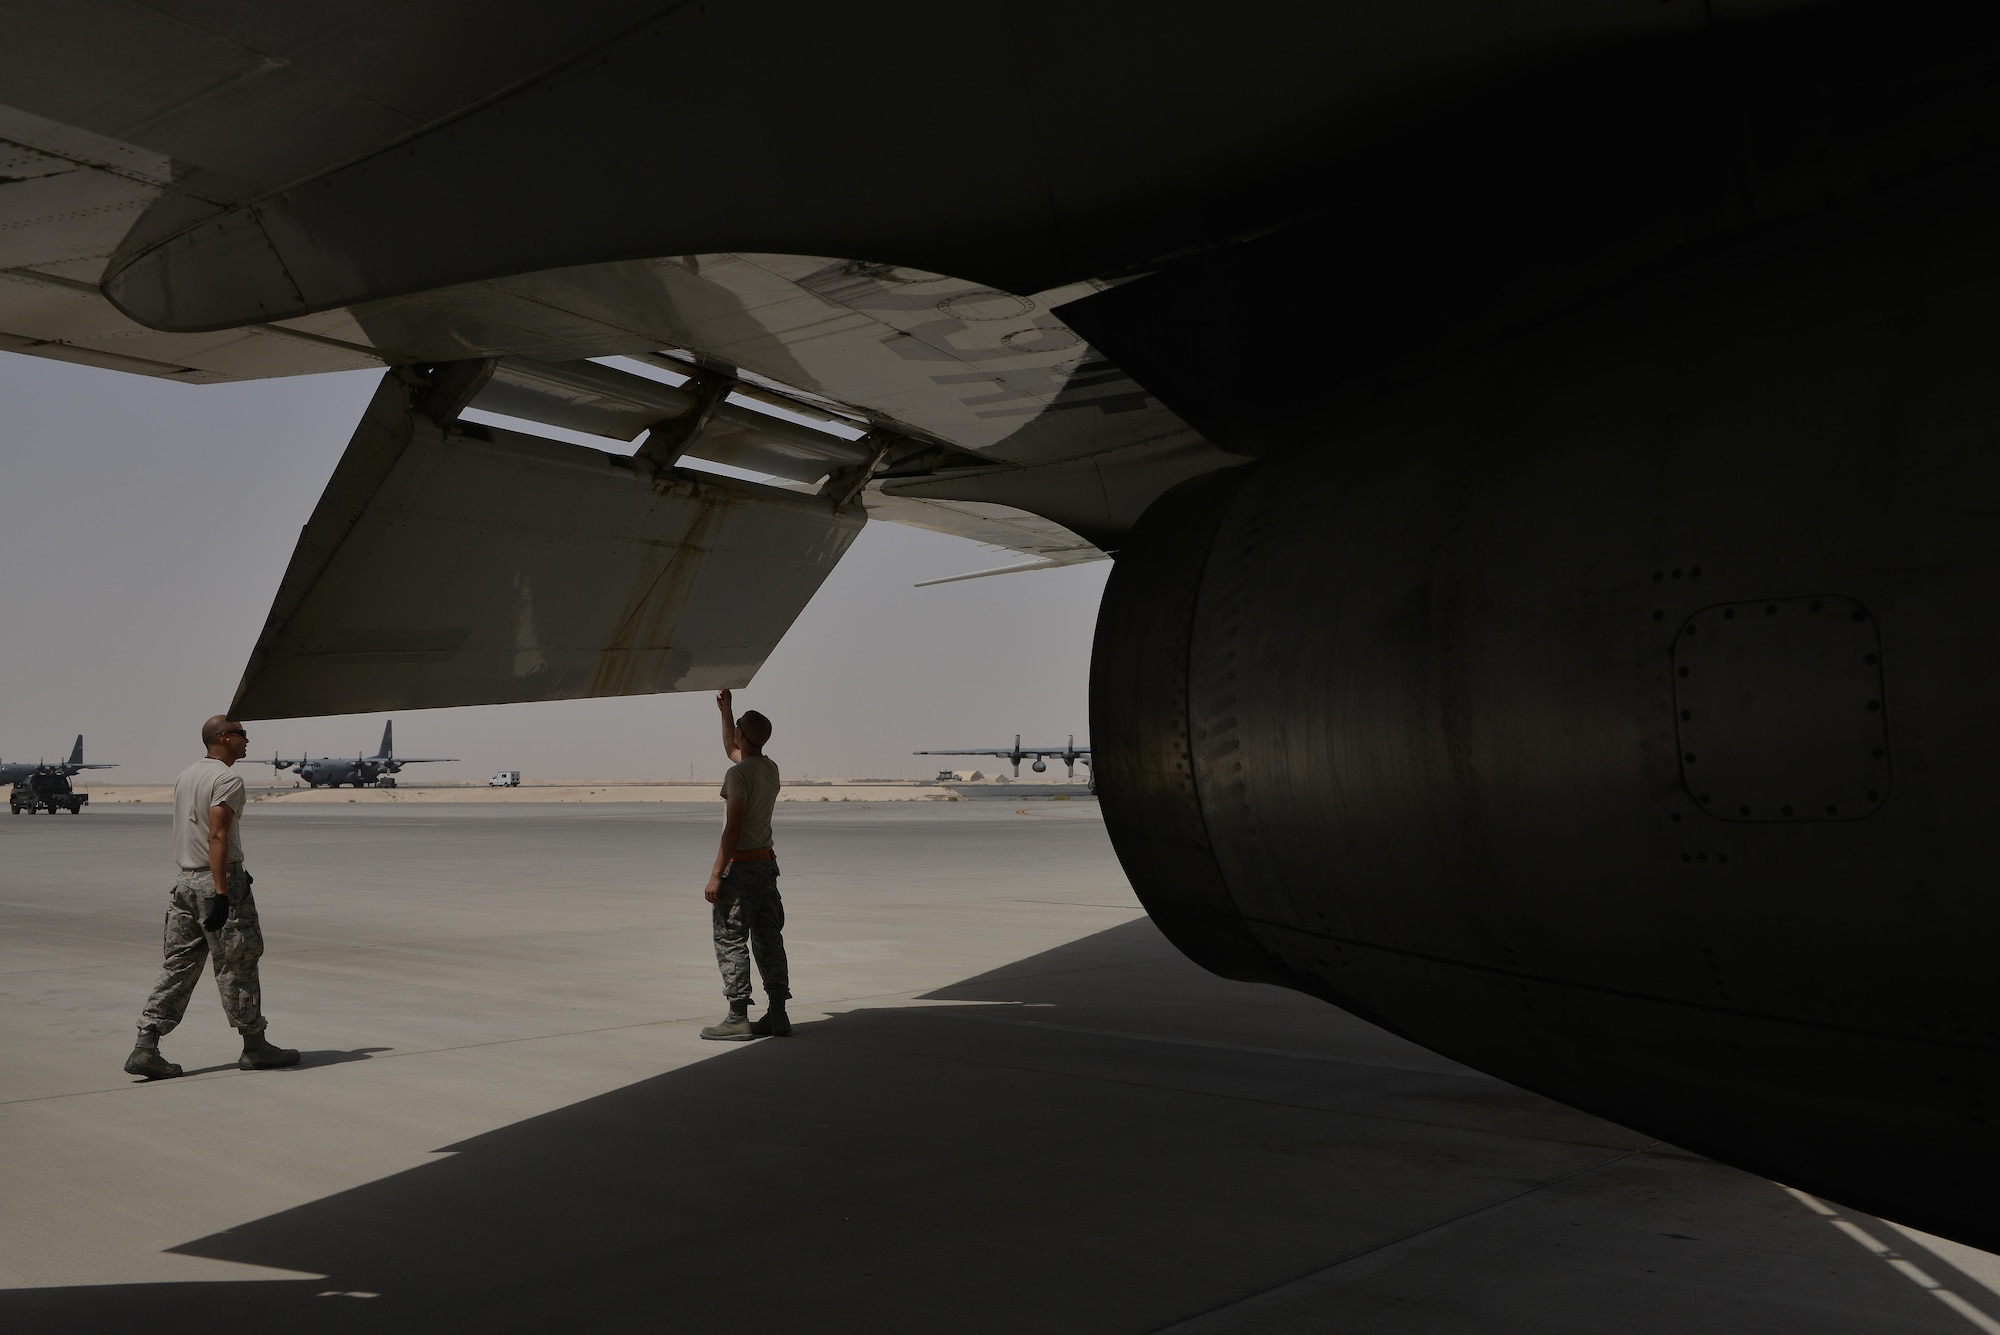 Airmen from the 7th Expeditionary Air Mobility Unit perform maintenance checks the exterior for damages and minor repairs of a Boeing E-8C Joint Surveillance Target Attack Radar Systems June 2, 2015 Al Udeid Air Base, Qatar. The E-8C JSTARS and its active duty, guard and reserve service members conduct missions overseas to support operations on the war on terror. During this time JSTARS completed 100K combat hours by continually flying 24/7 for 11.4 years. (U.S. Air Force photo/Staff Sgt. Alexandre Montes)